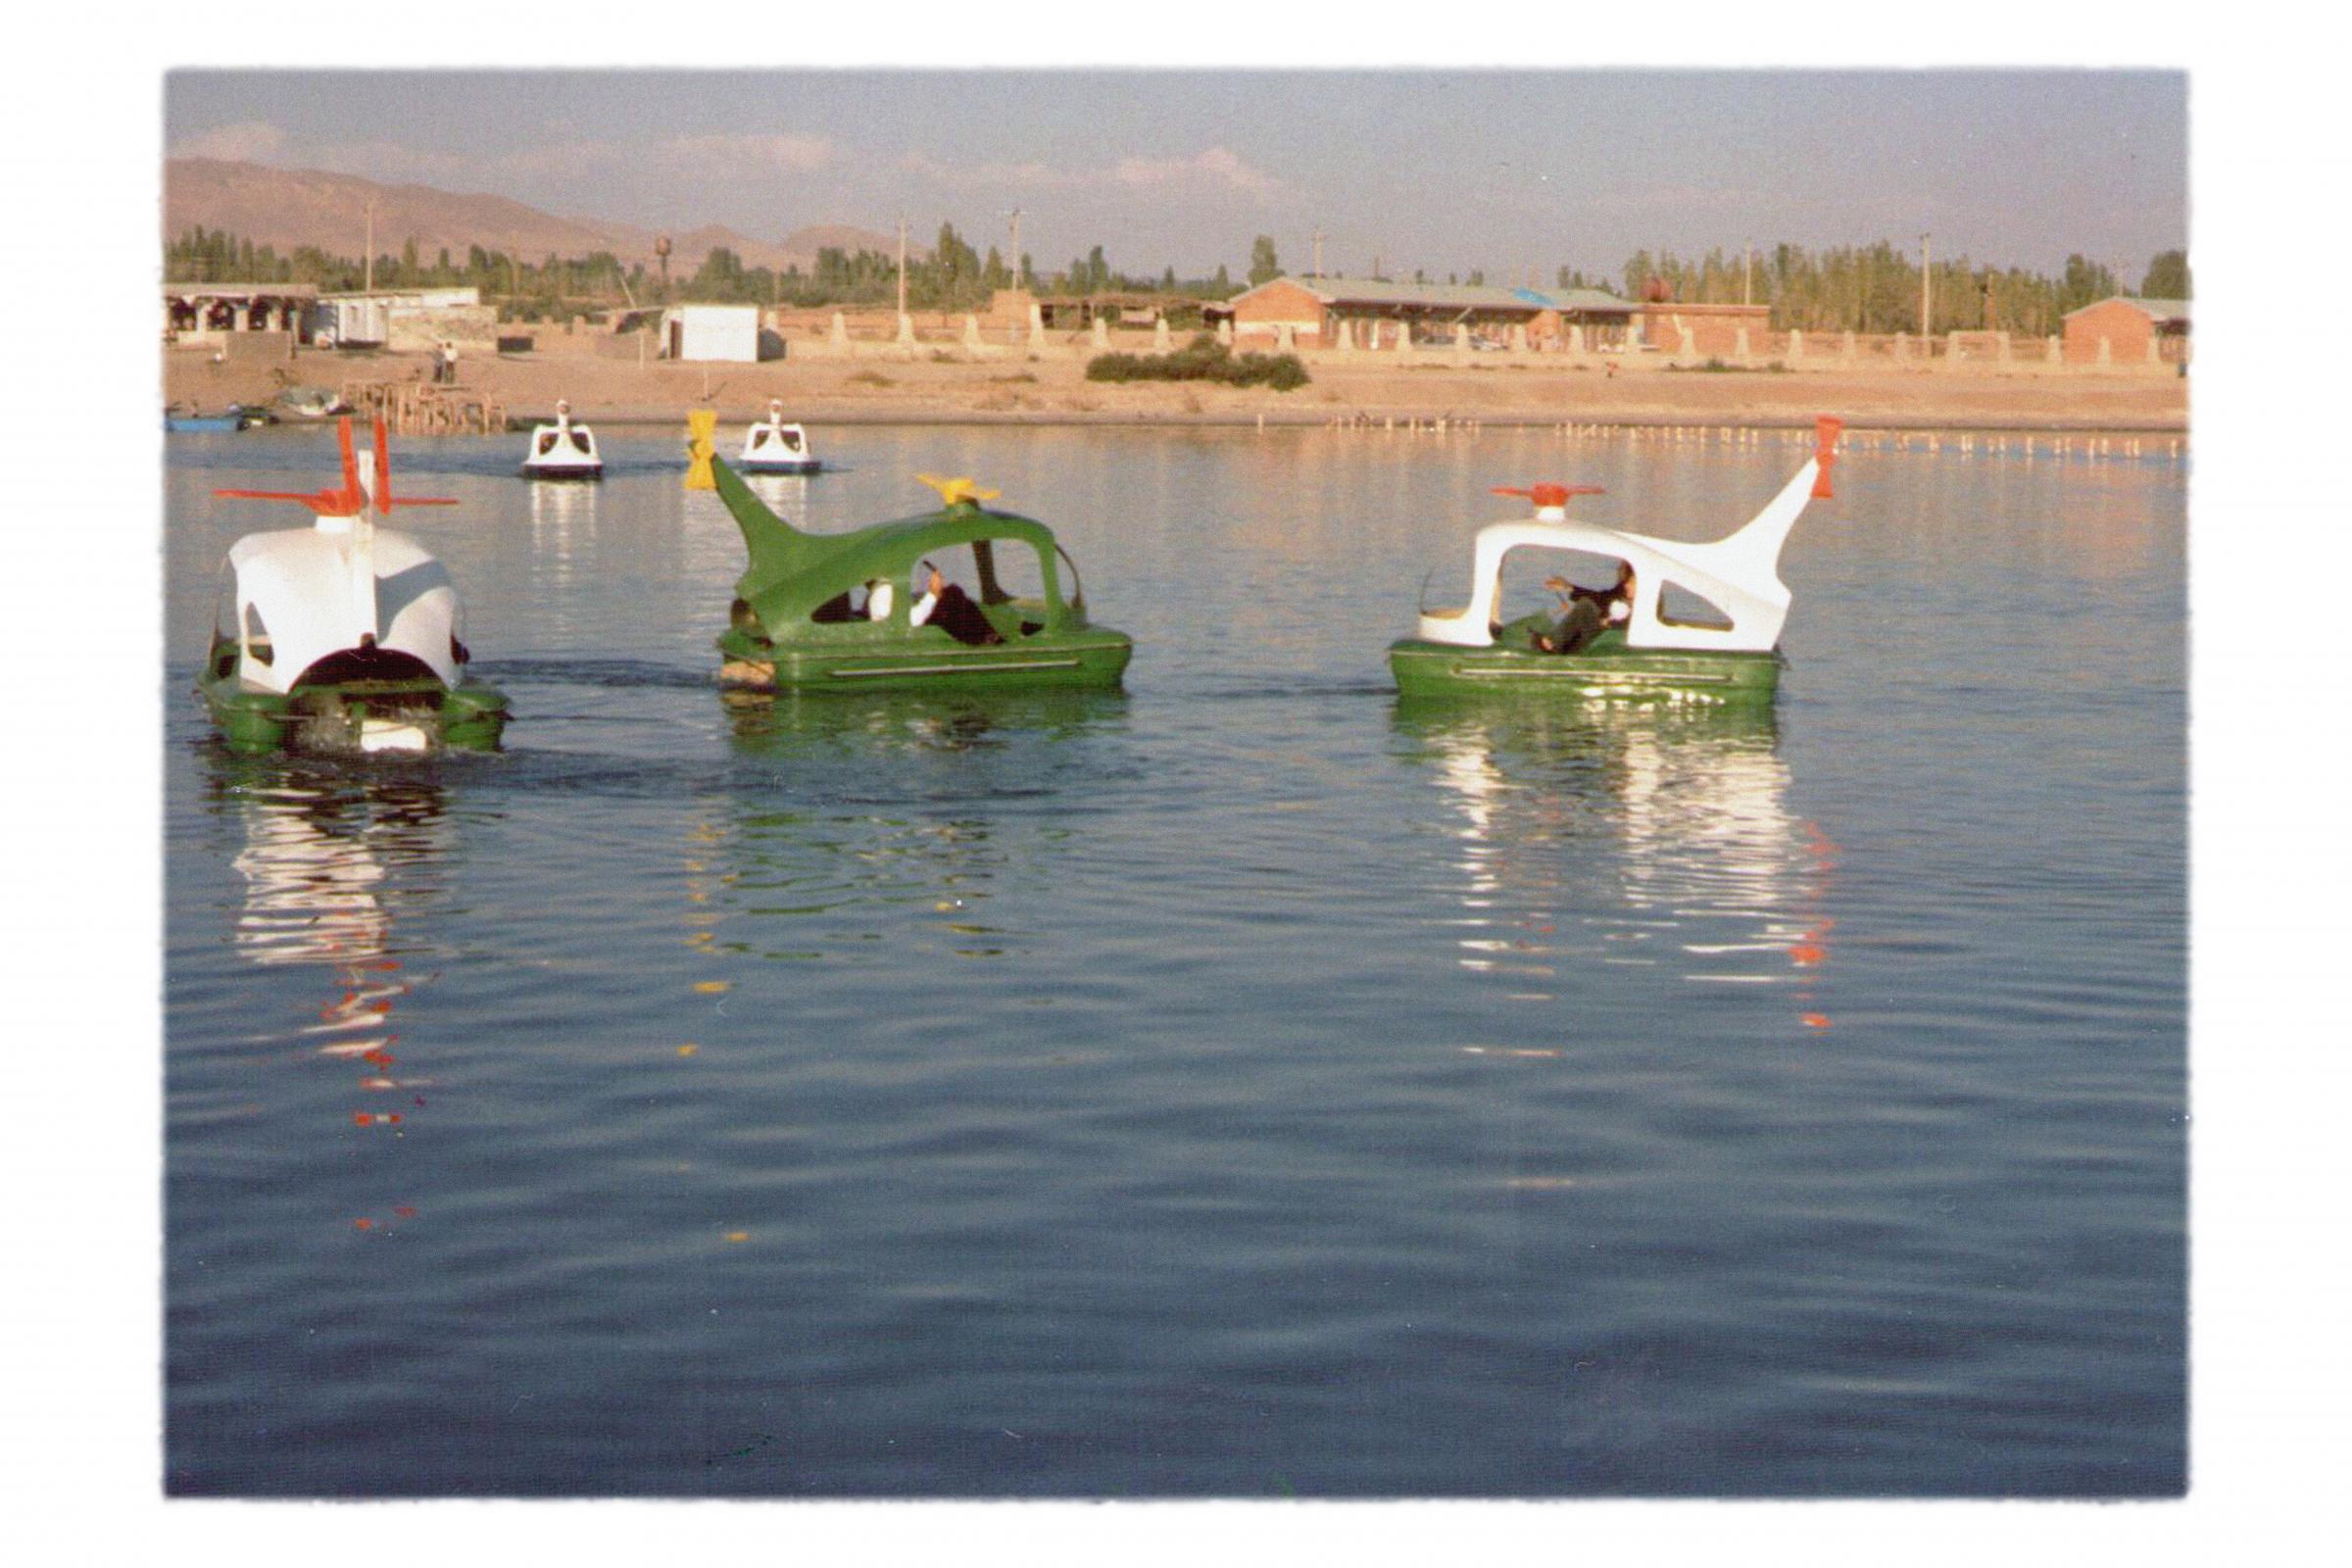 THE EYES OF EARTH (THE DEATH OF LAKE URMIA 2014-ONGOING) -   My uncle took this picture in 1990 of pedal boats he...